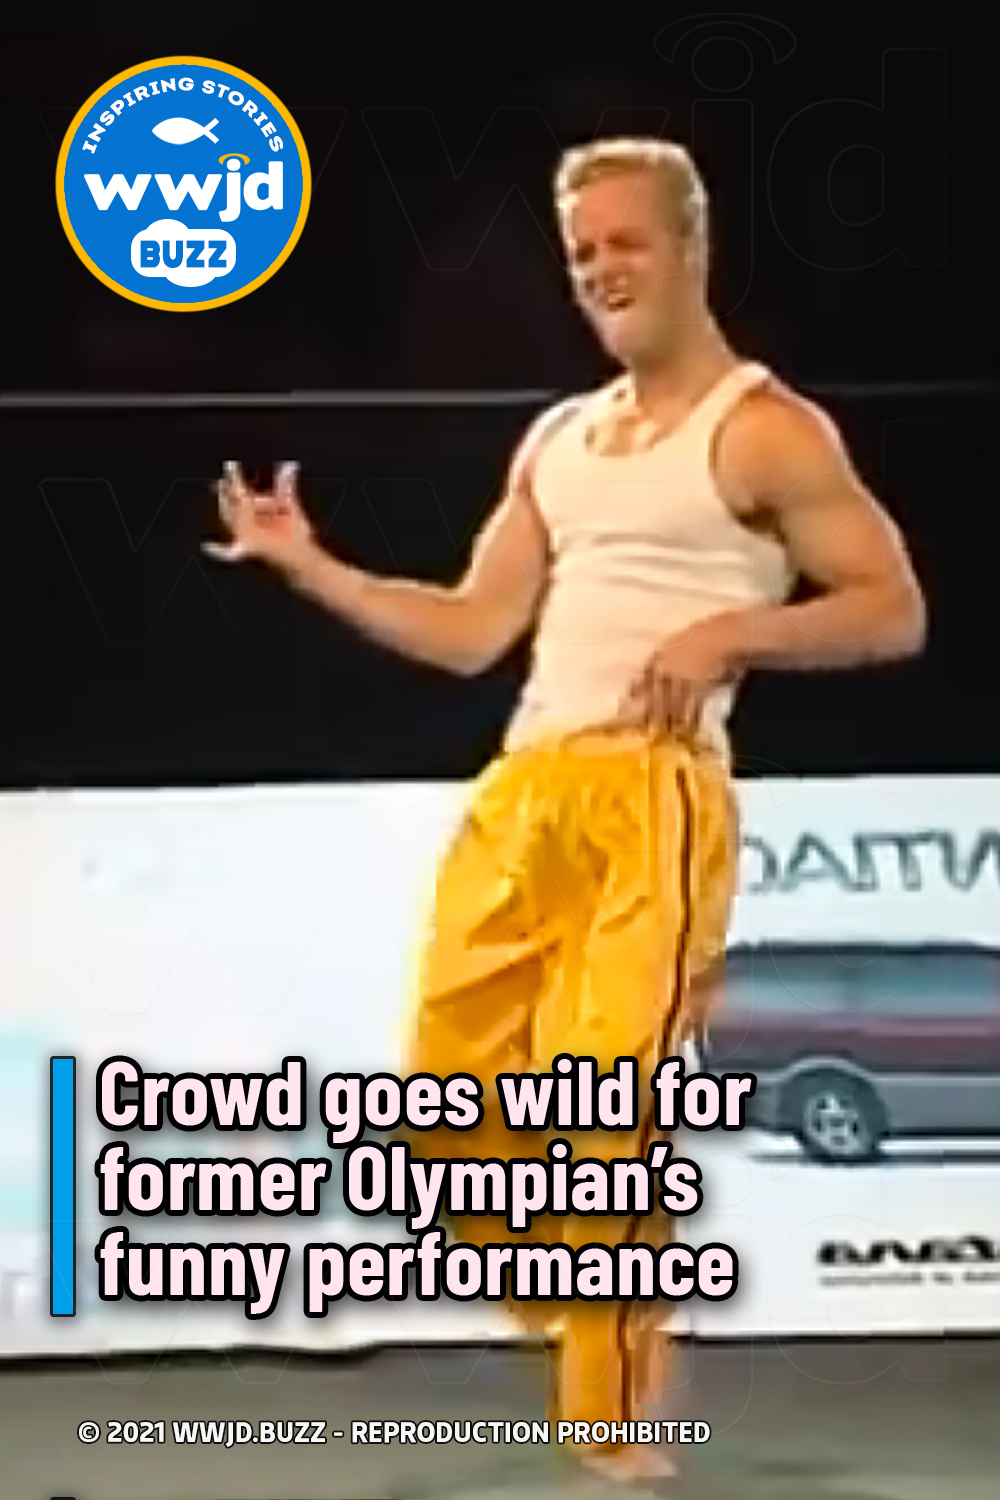 Crowd goes wild for former Olympian’s funny performance